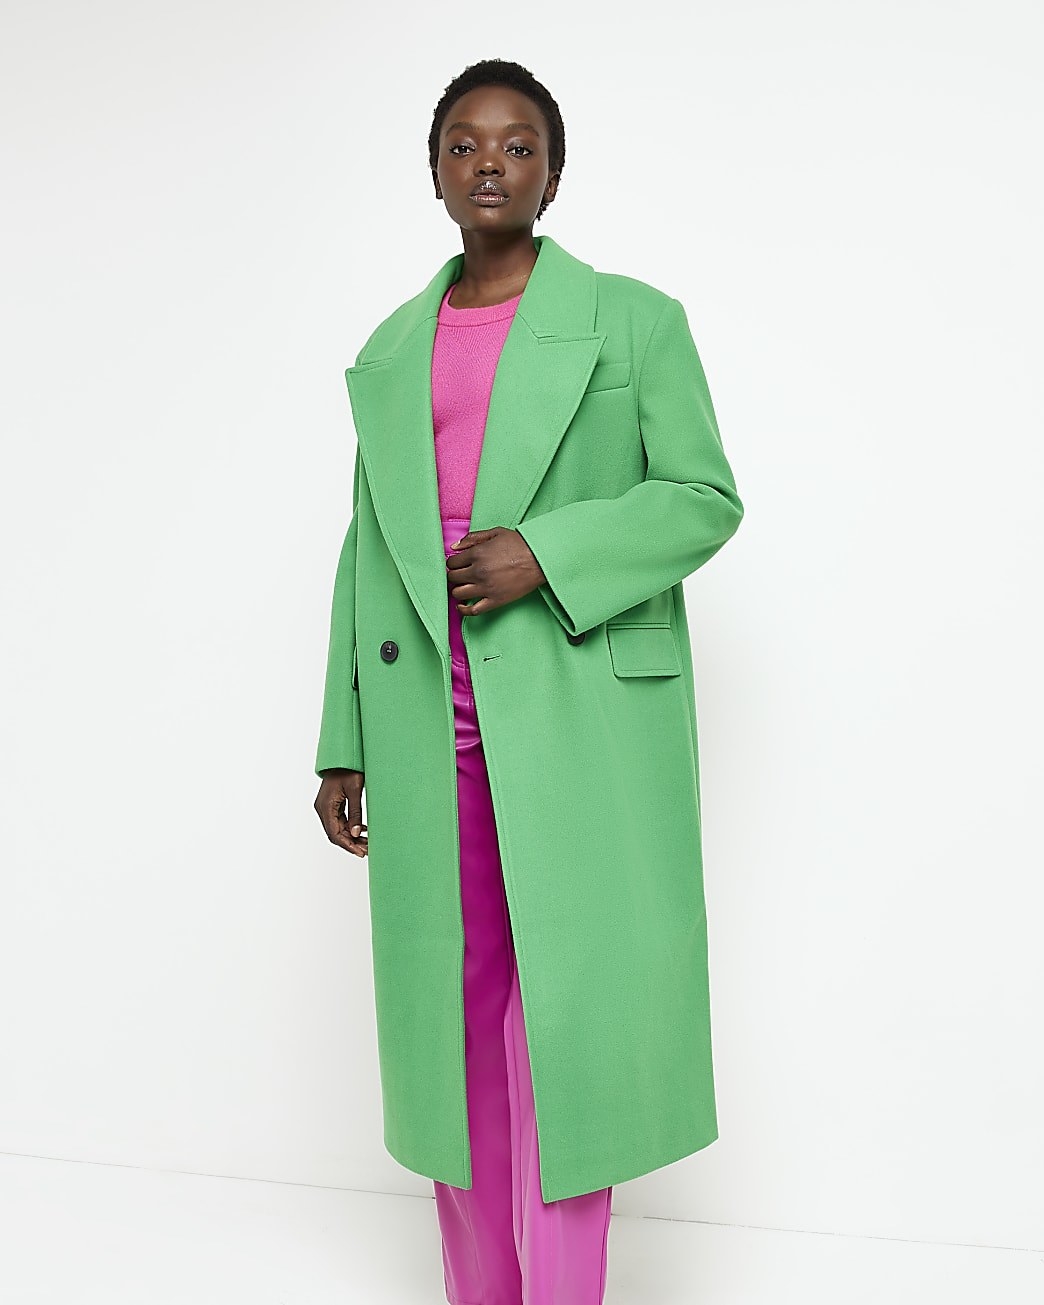 model in green overcoat with large lapels